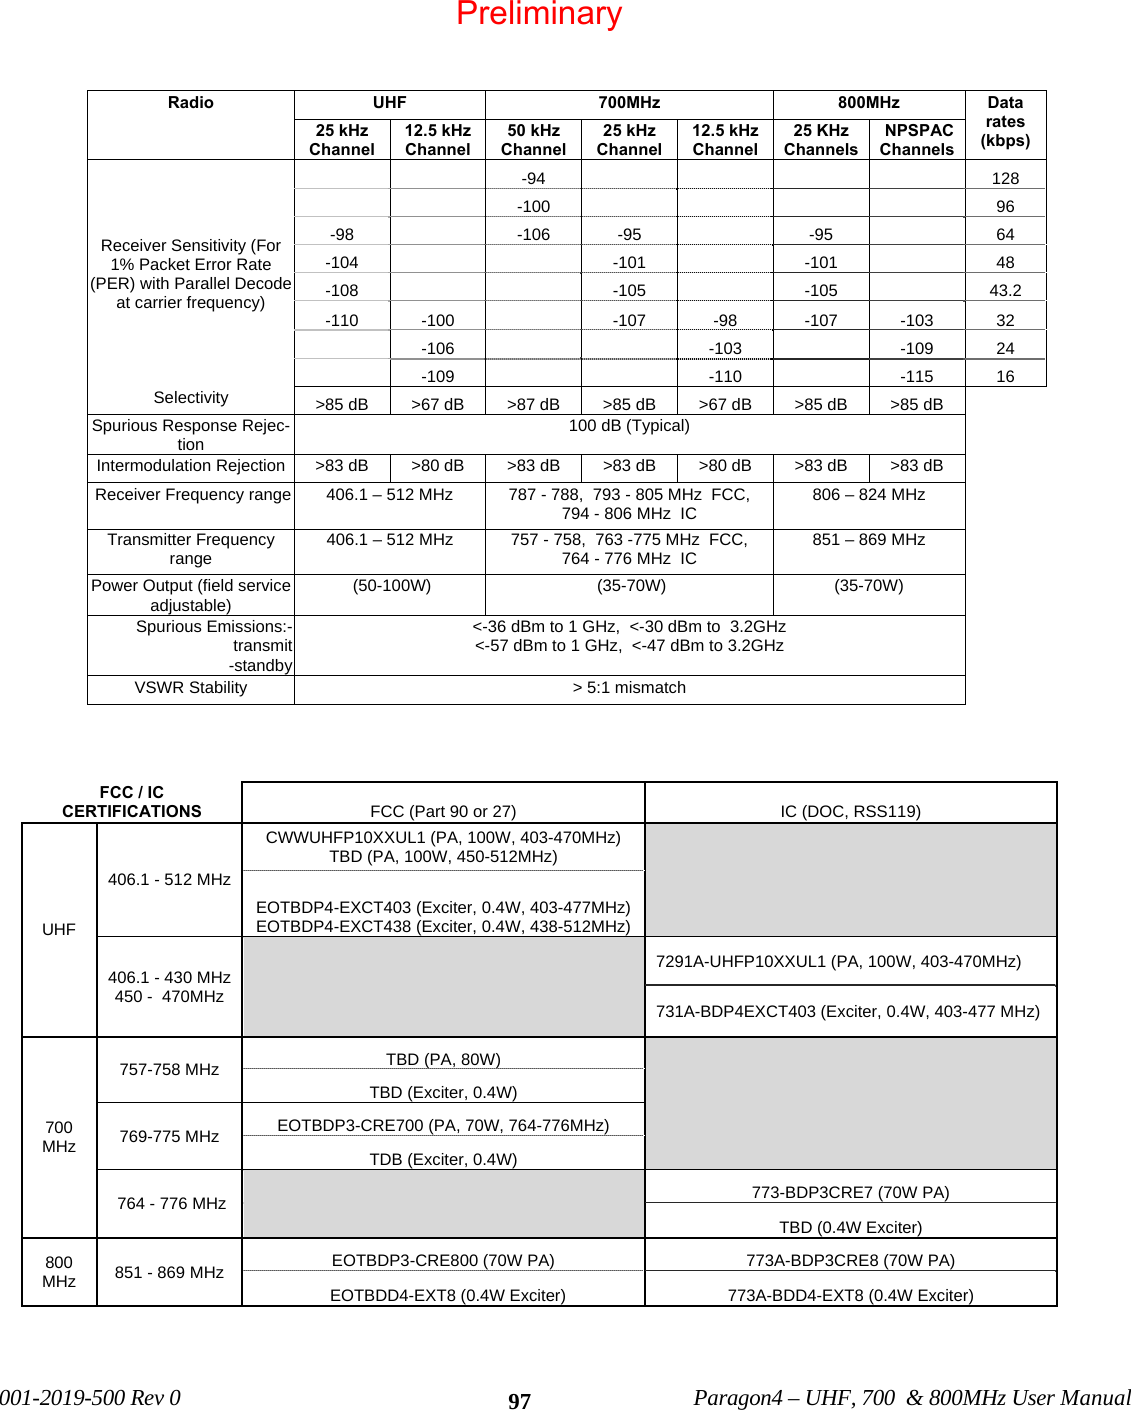             001-2019-500 Rev 0    Paragon4 – UHF, 700  &amp; 800MHz User Manual    97Radio UHF   700MHz  800MHz Data rates (kbps) 25 kHz Channel 12.5 kHz Channel 50 kHz Channel 25 kHz Channel 12.5 kHz Channel 25 KHz Channels  NPSPAC Channels Receiver Sensitivity (For 1% Packet Error Rate (PER) with Parallel Decode at carrier frequency)       -94              128       -100              96 -98   -106 -95   -95   64 -104      -101   -101   48 -108     -105   -105   43.2 -110 -100     -107  -98  -107 -103 32    -106        -103     -109  24    -109        -110     -115  16 Selectivity   &gt;85 dB  &gt;67 dB  &gt;87 dB  &gt;85 dB  &gt;67 dB  &gt;85 dB  &gt;85 dB   Spurious Response Rejec-tion  100 dB (Typical) Intermodulation Rejection &gt;83 dB   &gt;80 dB   &gt;83 dB  &gt;83 dB   &gt;80 dB   &gt;83 dB   &gt;83 dB   Receiver Frequency range  406.1 – 512 MHz  787 - 788,  793 - 805 MHz  FCC,     794 - 806 MHz  IC  806 – 824 MHz Transmitter Frequency range  406.1 – 512 MHz  757 - 758,  763 -775 MHz  FCC,      764 - 776 MHz  IC  851 – 869 MHz Power Output (field service adjustable)   (50-100W)   (35-70W)  (35-70W) Spurious Emissions:- transmit -standby &lt;-36 dBm to 1 GHz,  &lt;-30 dBm to  3.2GHz                                       &lt;-57 dBm to 1 GHz,  &lt;-47 dBm to 3.2GHz    VSWR Stability  &gt; 5:1 mismatch    FCC / IC CERTIFICATIONS  FCC (Part 90 or 27)  IC (DOC, RSS119)  UHF 406.1 - 512 MHz  CWWUHFP10XXUL1 (PA, 100W, 403-470MHz) TBD (PA, 100W, 450-512MHz)    EOTBDP4-EXCT403 (Exciter, 0.4W, 403-477MHz) EOTBDP4-EXCT438 (Exciter, 0.4W, 438-512MHz) 406.1 - 430 MHz   450 -  470MHz  7291A-UHFP10XXUL1 (PA, 100W, 403-470MHz)  731A-BDP4EXCT403 (Exciter, 0.4W, 403-477 MHz) 700 MHz 757-758 MHz  TBD (PA, 80W)    TBD (Exciter, 0.4W)    769-775 MHz  EOTBDP3-CRE700 (PA, 70W, 764-776MHz)    TDB (Exciter, 0.4W)     764 - 776 MHz     773-BDP3CRE7 (70W PA)    TBD (0.4W Exciter) 800 MHz  851 - 869 MHz  EOTBDP3-CRE800 (70W PA)  773A-BDP3CRE8 (70W PA)   EOTBDD4-EXT8 (0.4W Exciter)  773A-BDD4-EXT8 (0.4W Exciter)    Preliminary